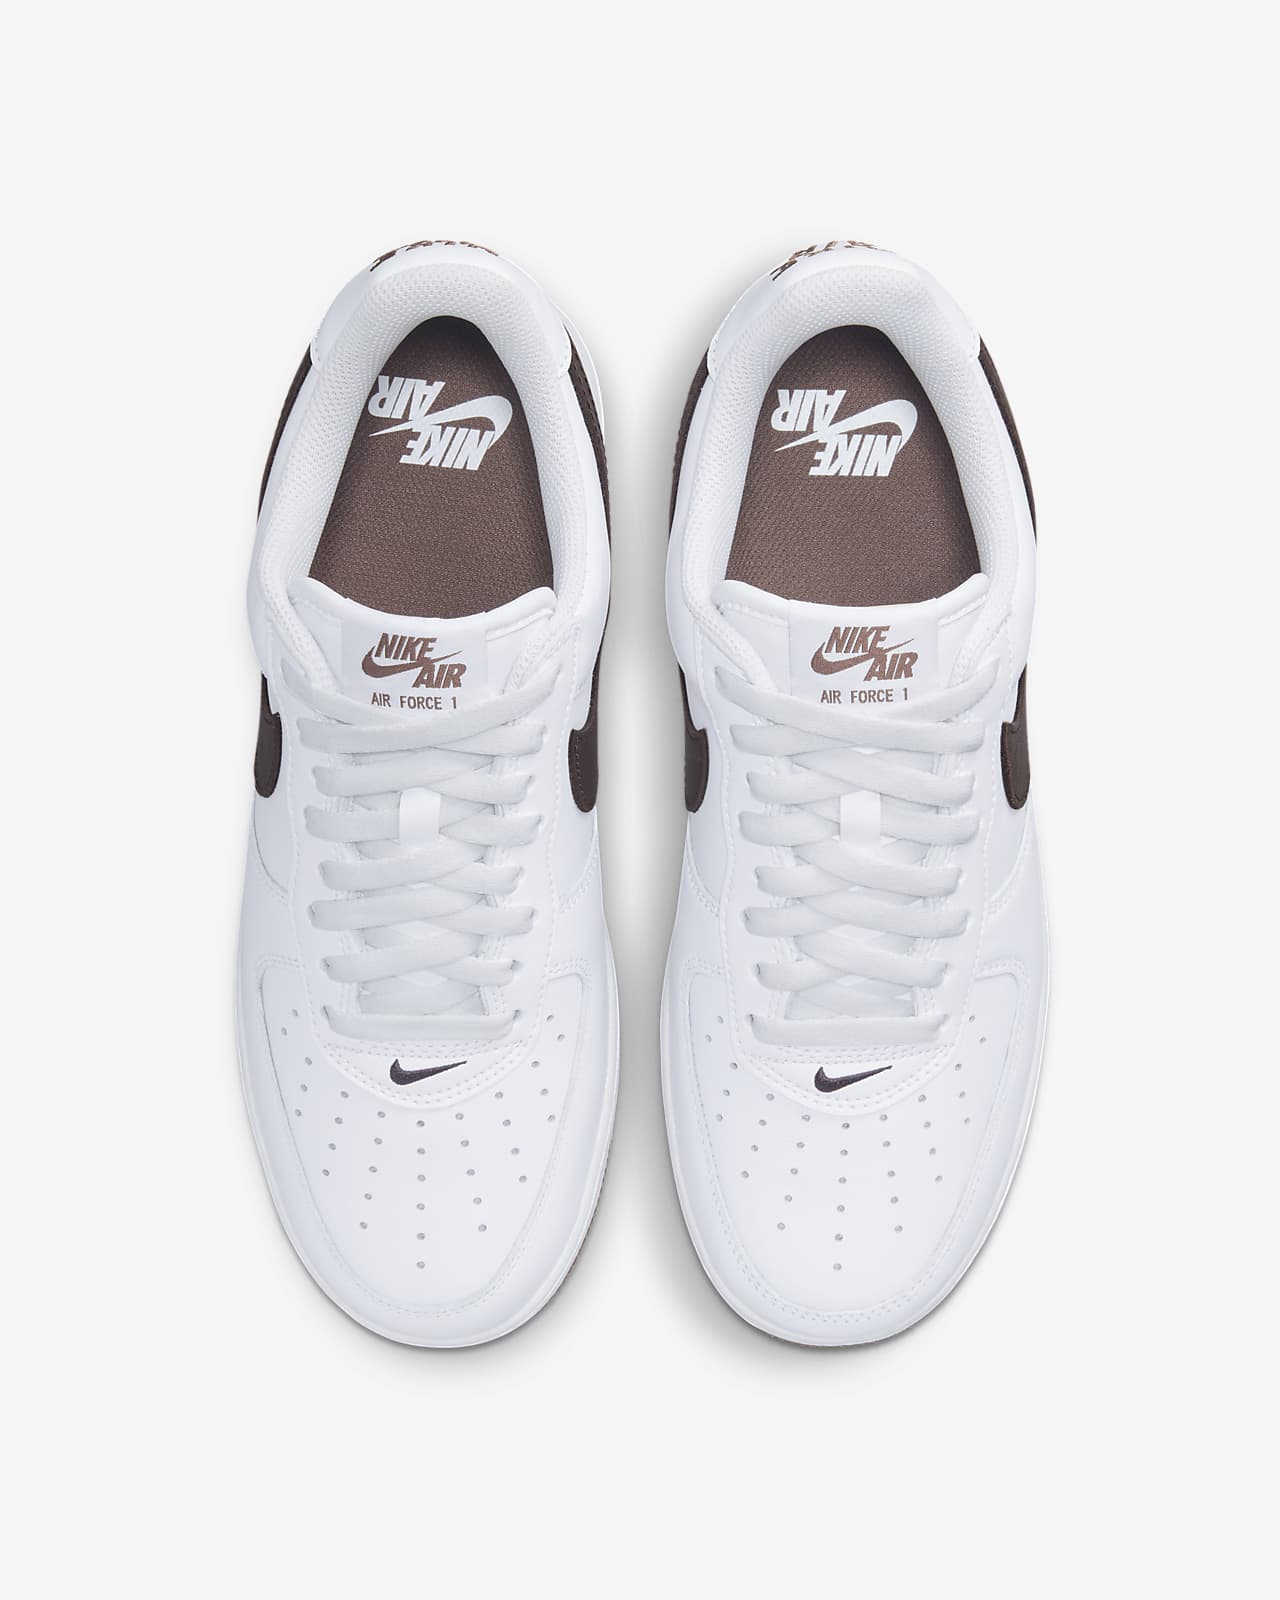 Are Nike Air Forces Running Shoes | lupon.gov.ph